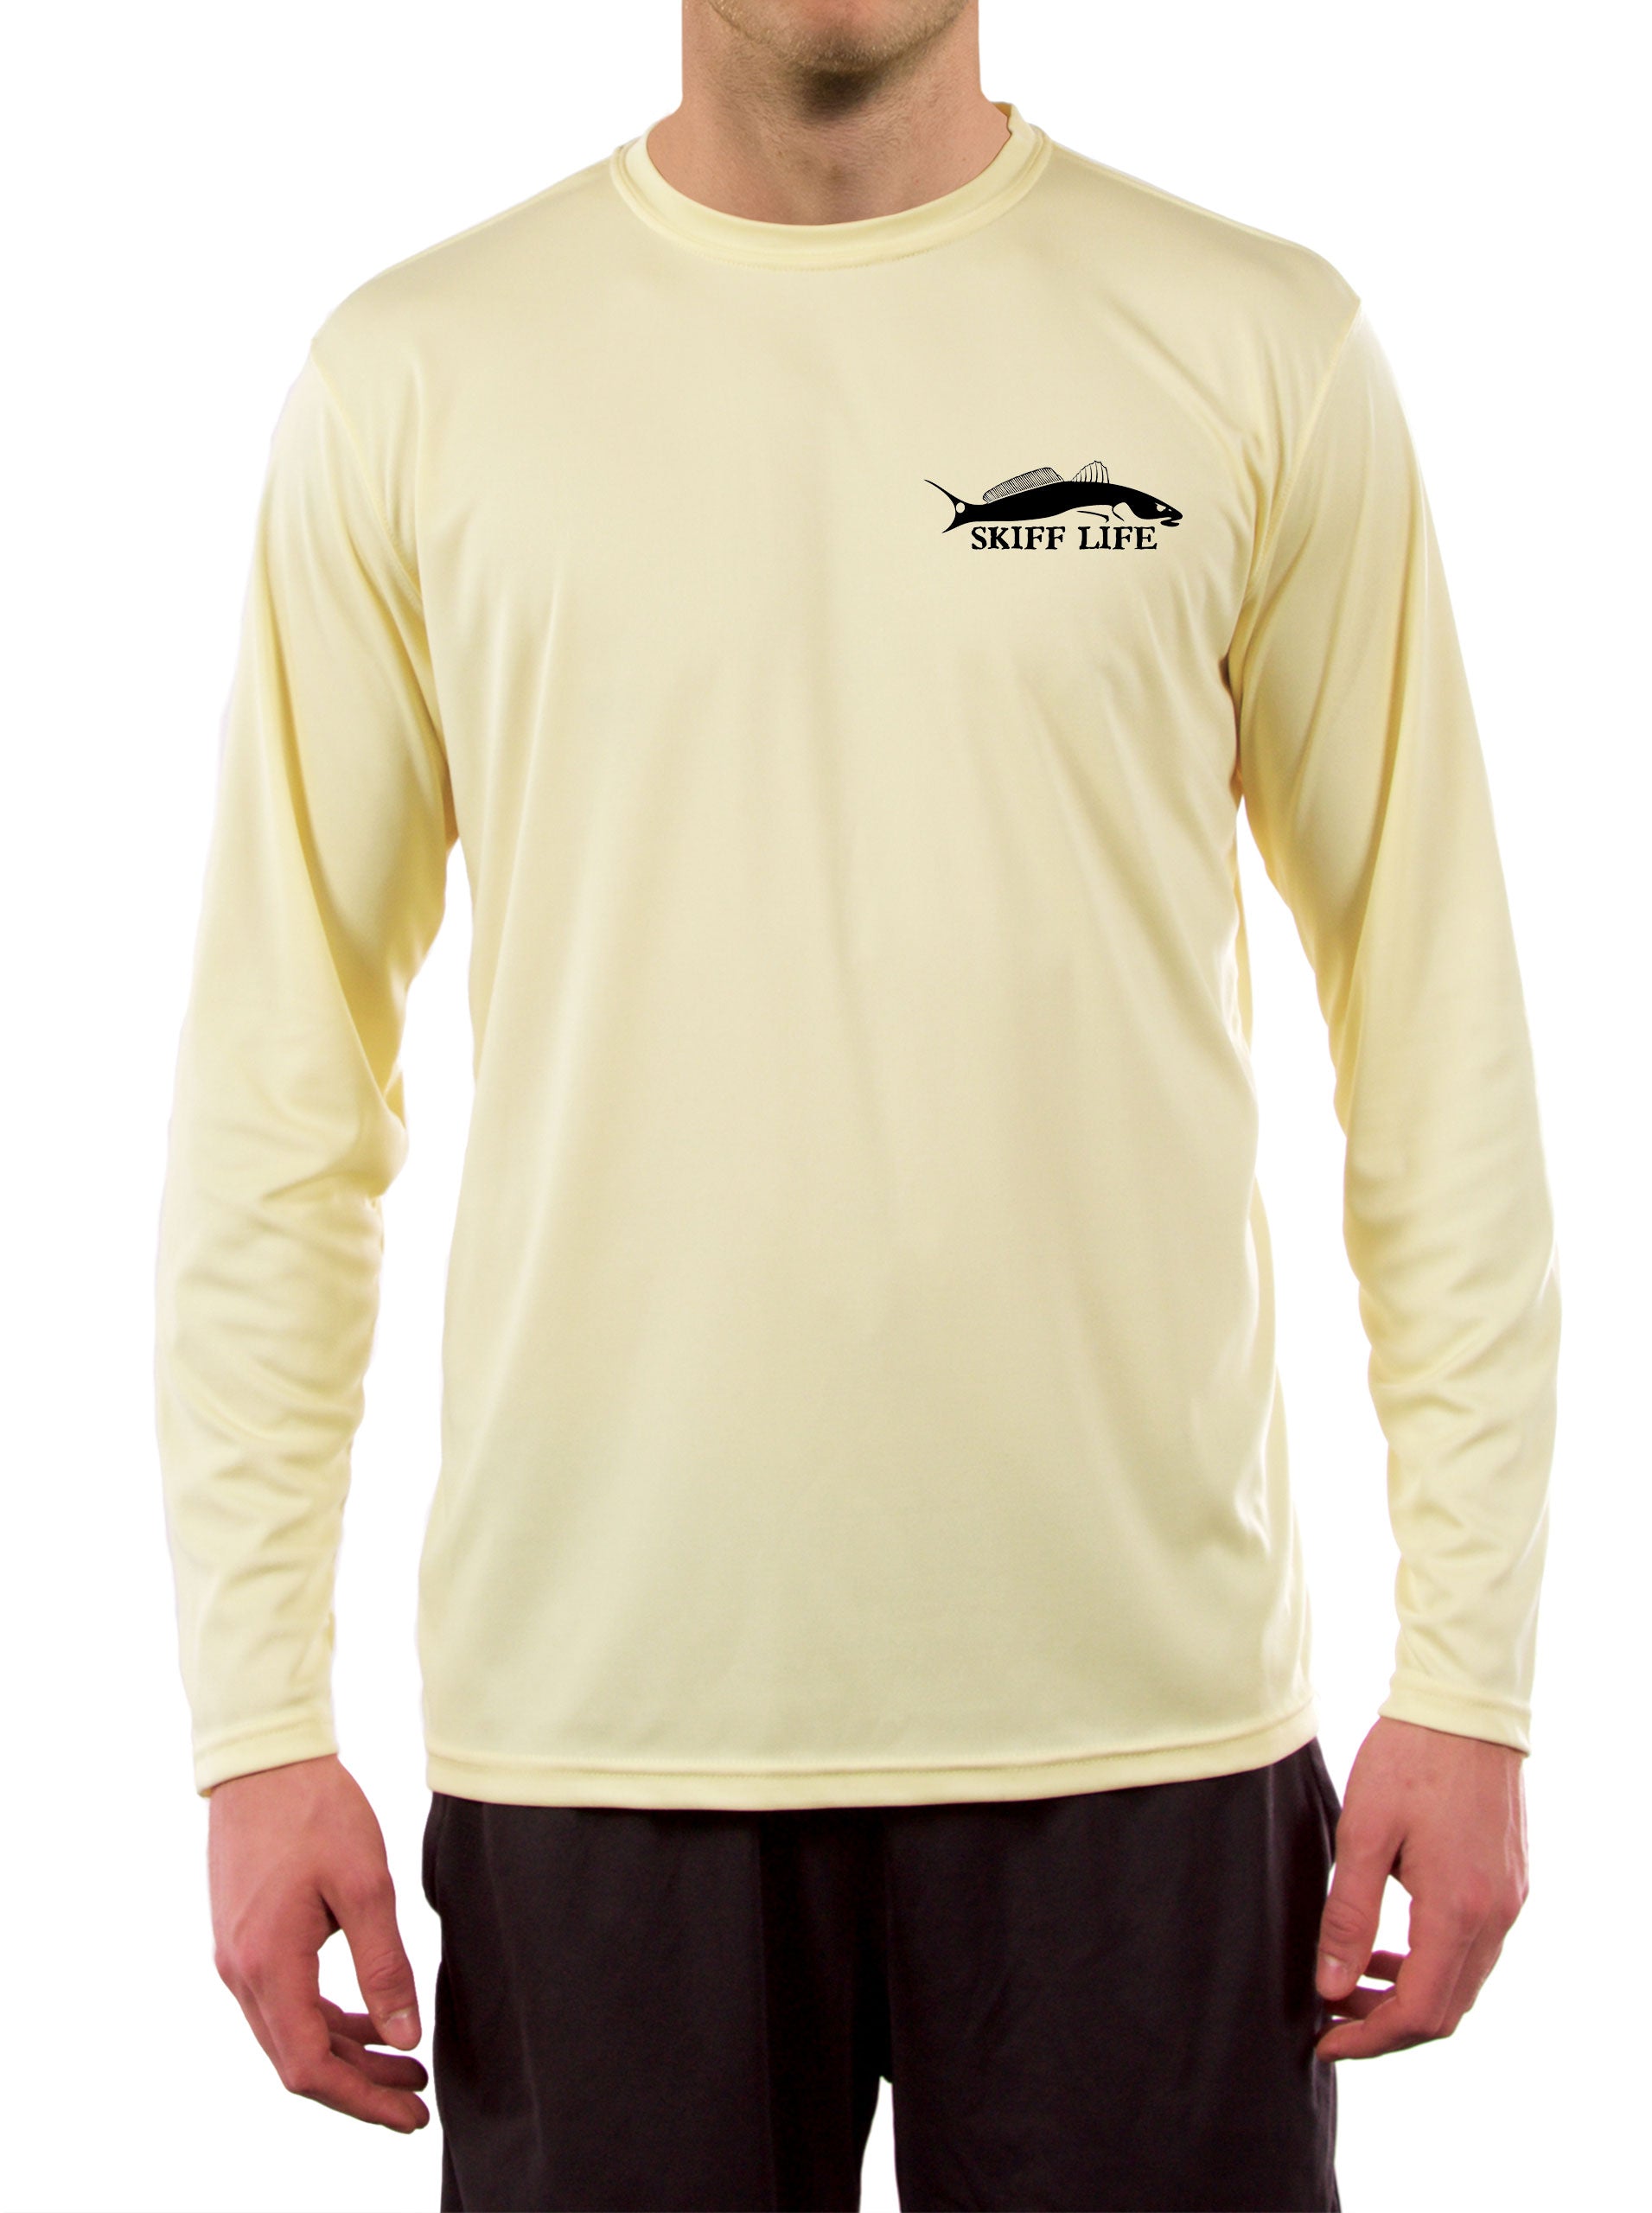 Flounder Fishing Shirts for Men Fluke - UV Protected +50 Sun Protection with Moisture Wicking Technology Large / Ice Blue